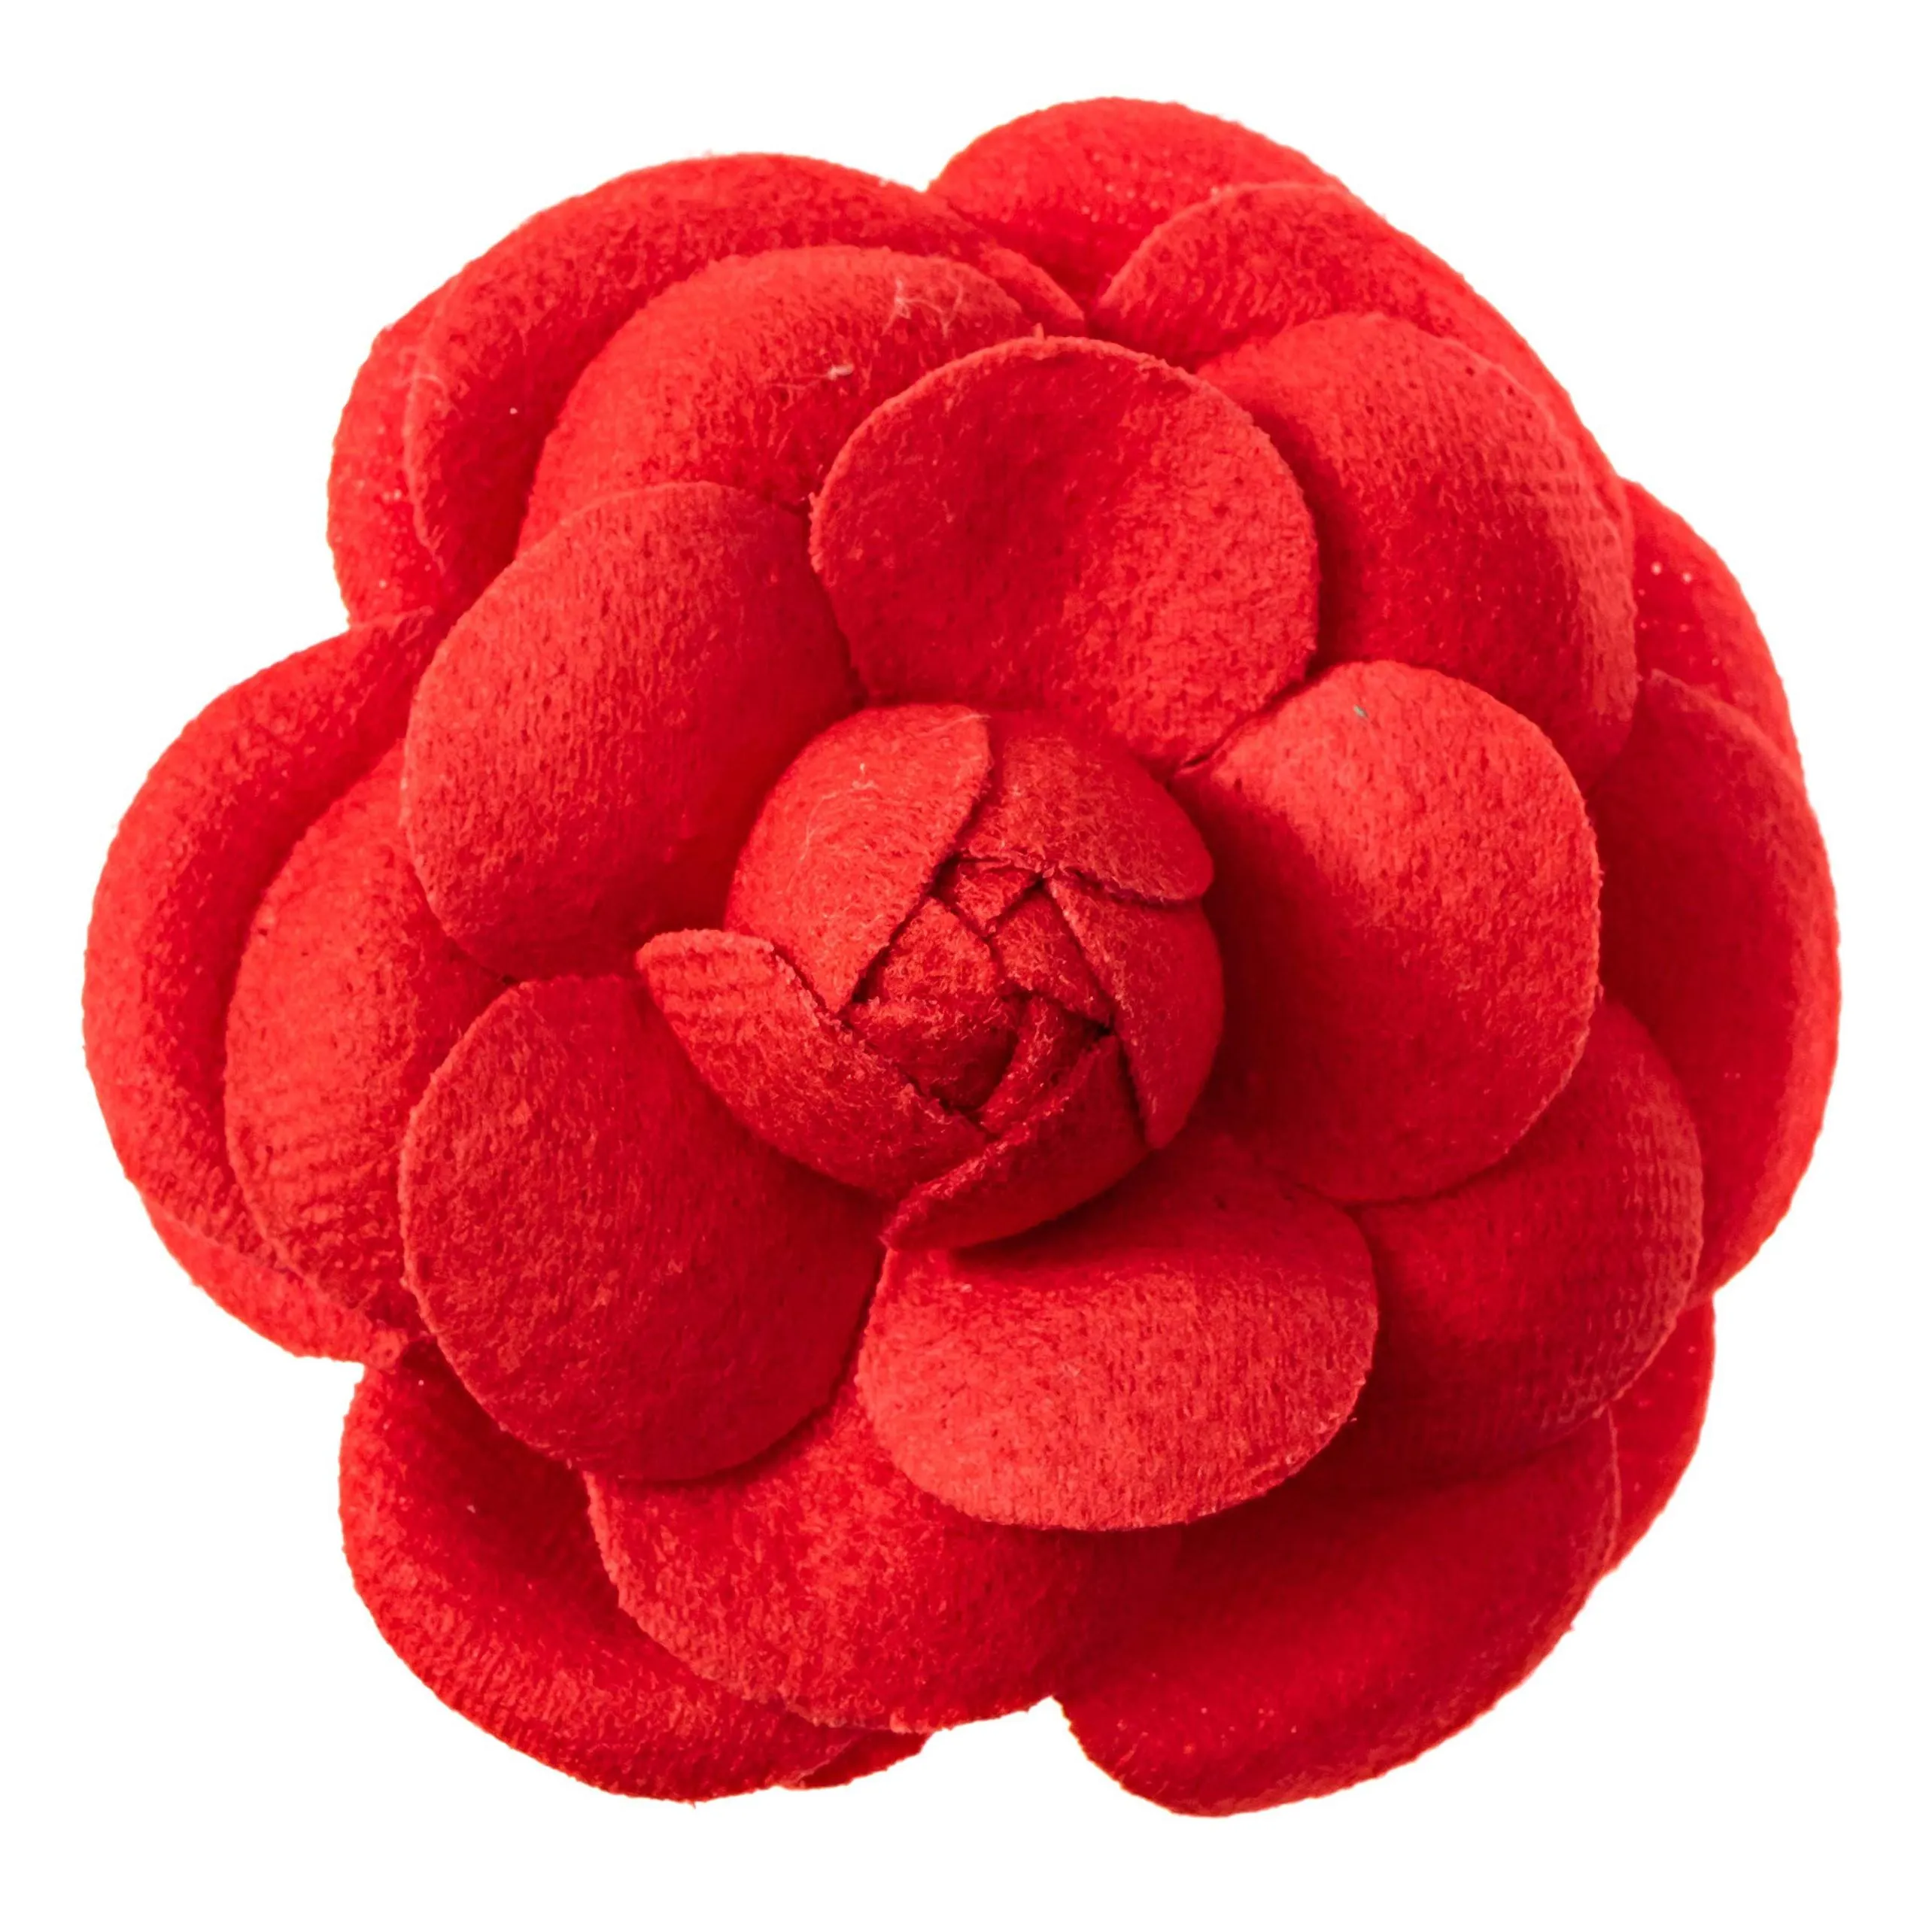 pins brooches camellia brooch pin flower leather for women drop delivery 2022 amajewelry amifa